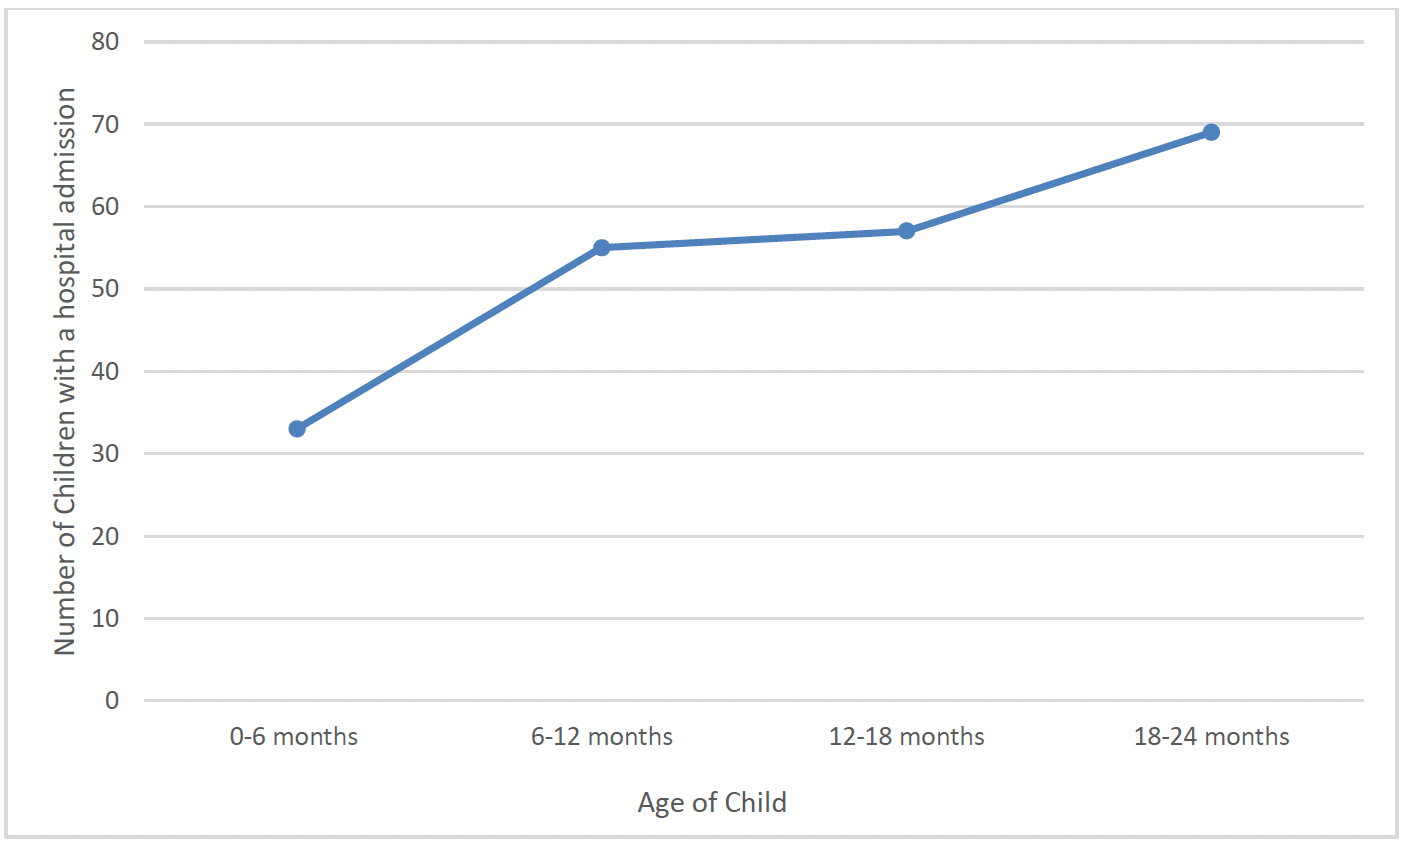 Chart 49 is a line chart showing the number of children with a hospital admission recorded at 0-6 months, 6-12 months, 12-18 months and 18-24 months. There was an increase in hospital admissions as children got older.